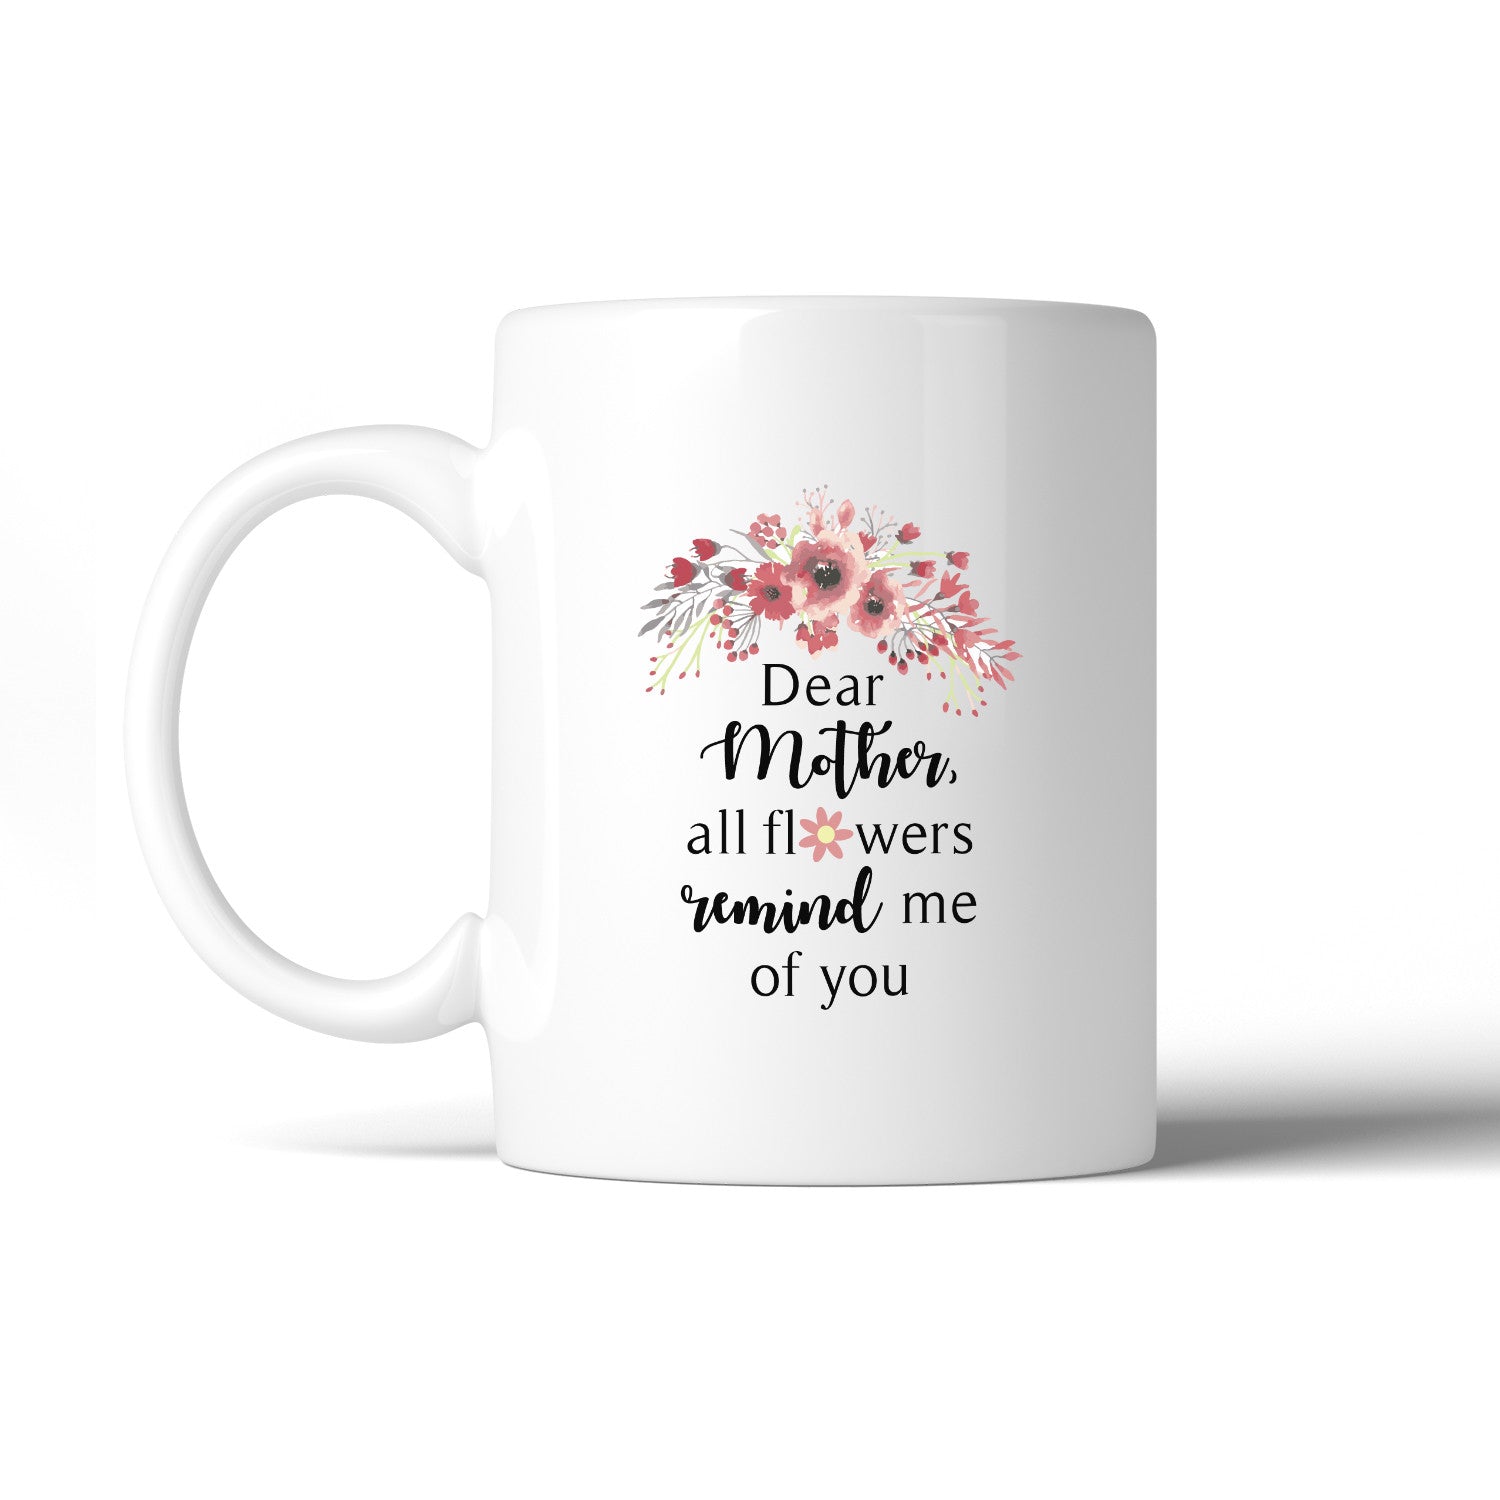 Funny Mom Gifts - Dear Mom: Thanks for Putting Up With a Spoiled Child,  Like My Brother - Mother's Day Gift For Mom Coffee Mug 11 Oz. White